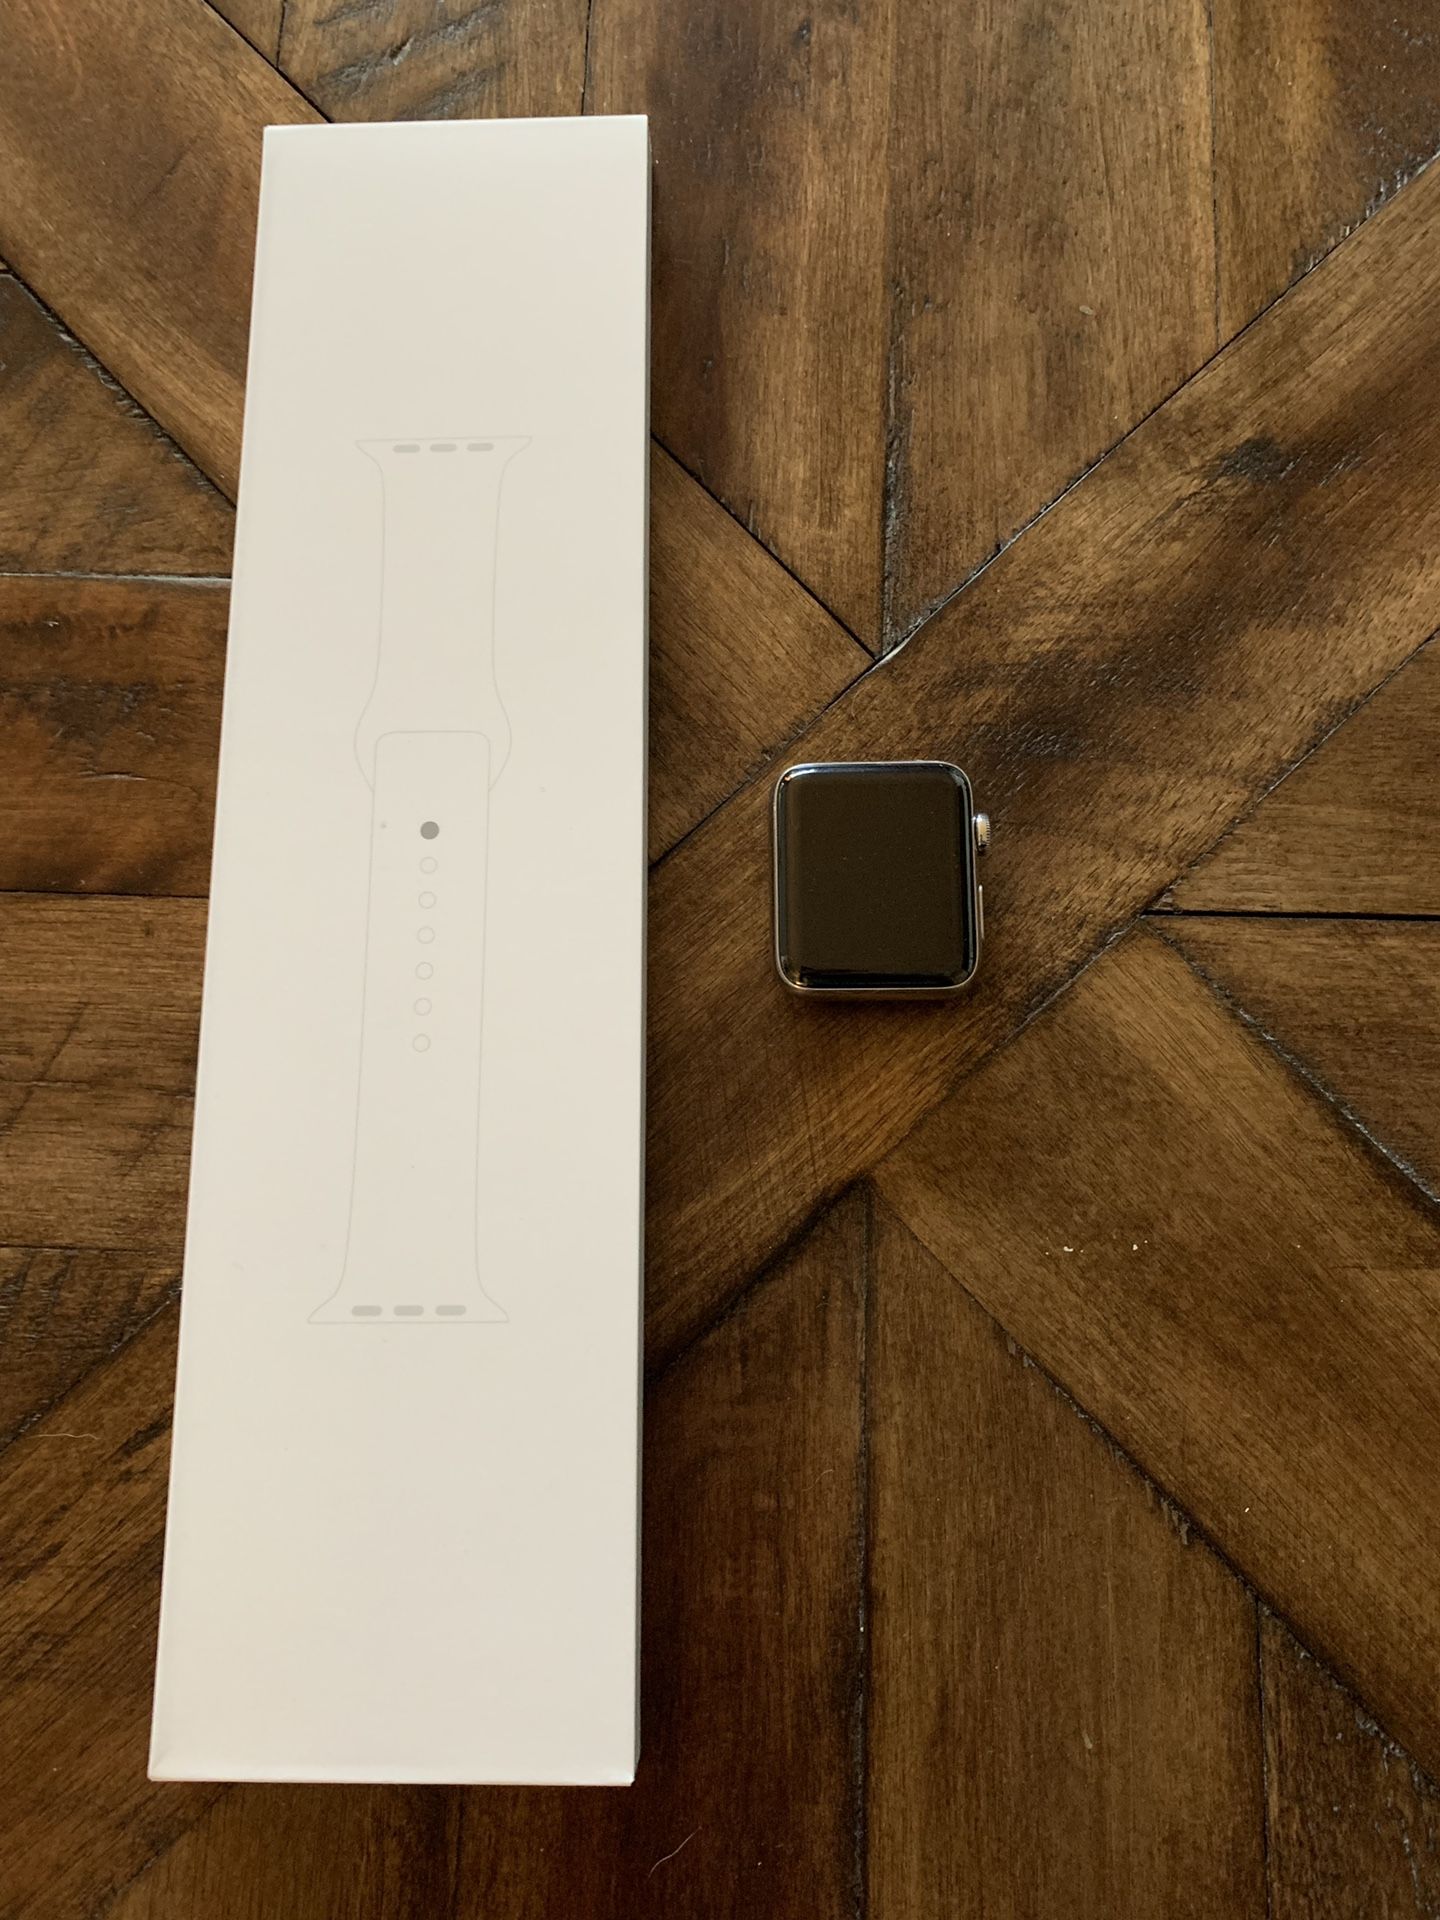 Apple Watch Series 2, 42mm, Stainless Steel, Sport Band